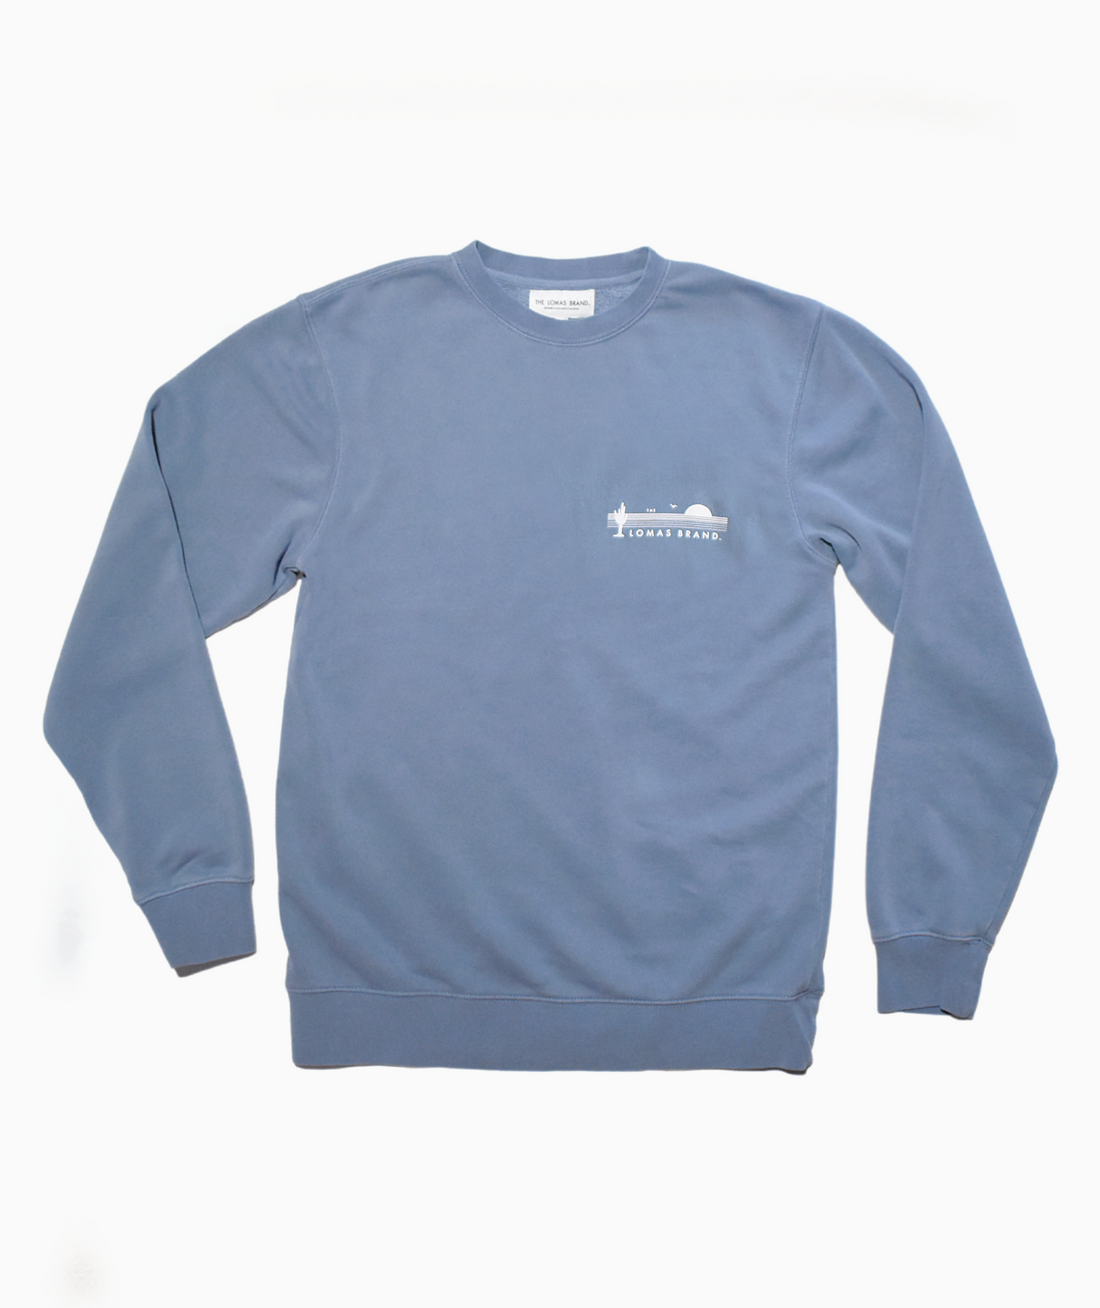 Cozy and warm faded blue crewneck sweatshirt. The upper left of the sweatshirt features The Lomas Brand saguaro logo in white. The logo has a saguaro cactus, bird, and a rising sun in white. 'The' is printed above the logo and 'Lomas Brand' is printed below.